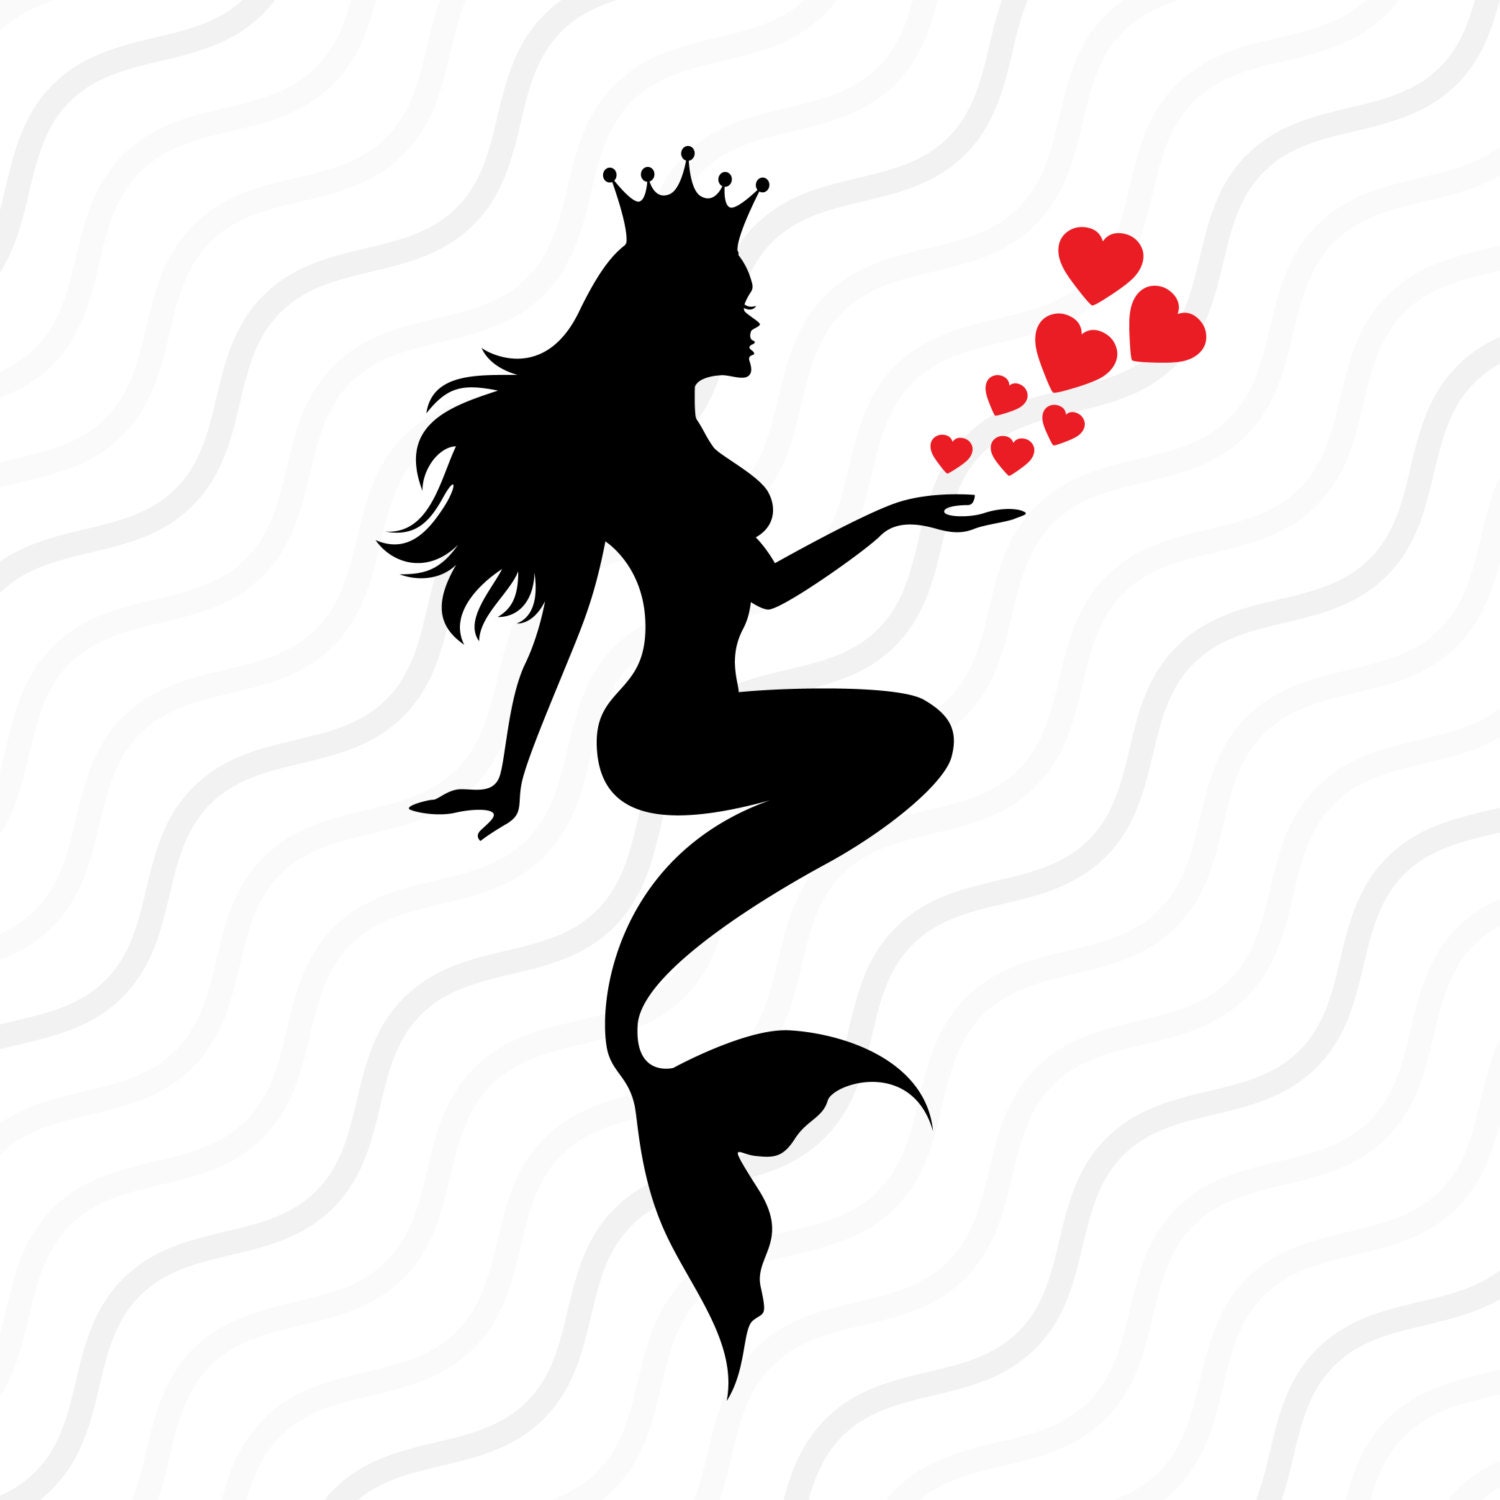 Free Free 197 Mermaid In The Usa Svg SVG PNG EPS DXF File